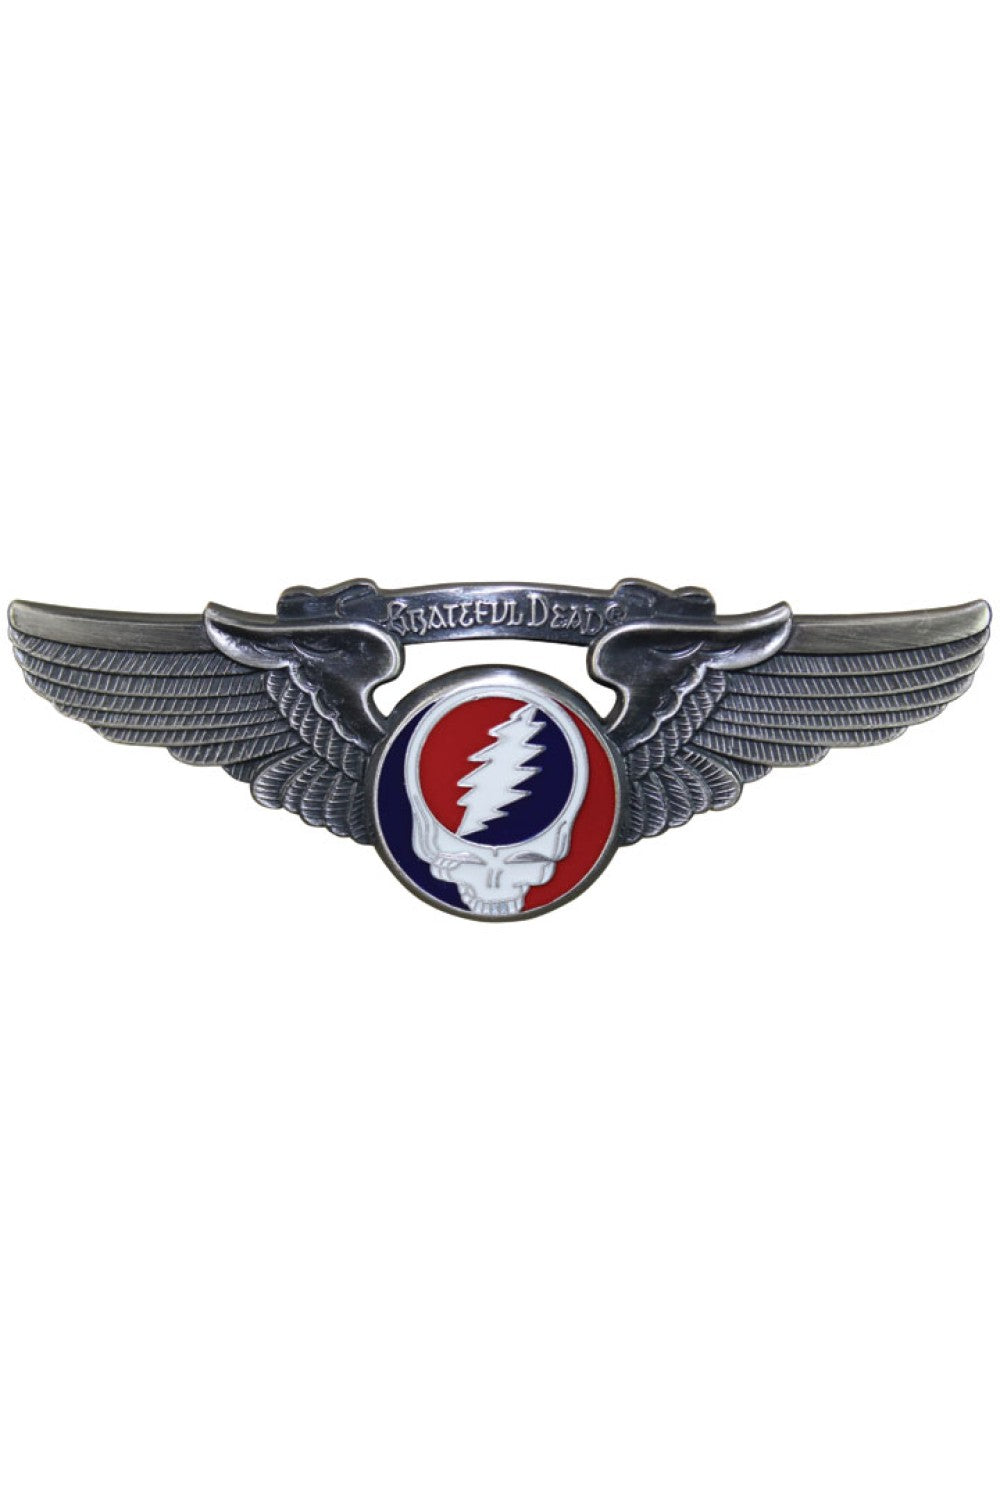 Grateful Dead Steal Your Face Small Pilot Wing Pin Rockwings - eDeadShop